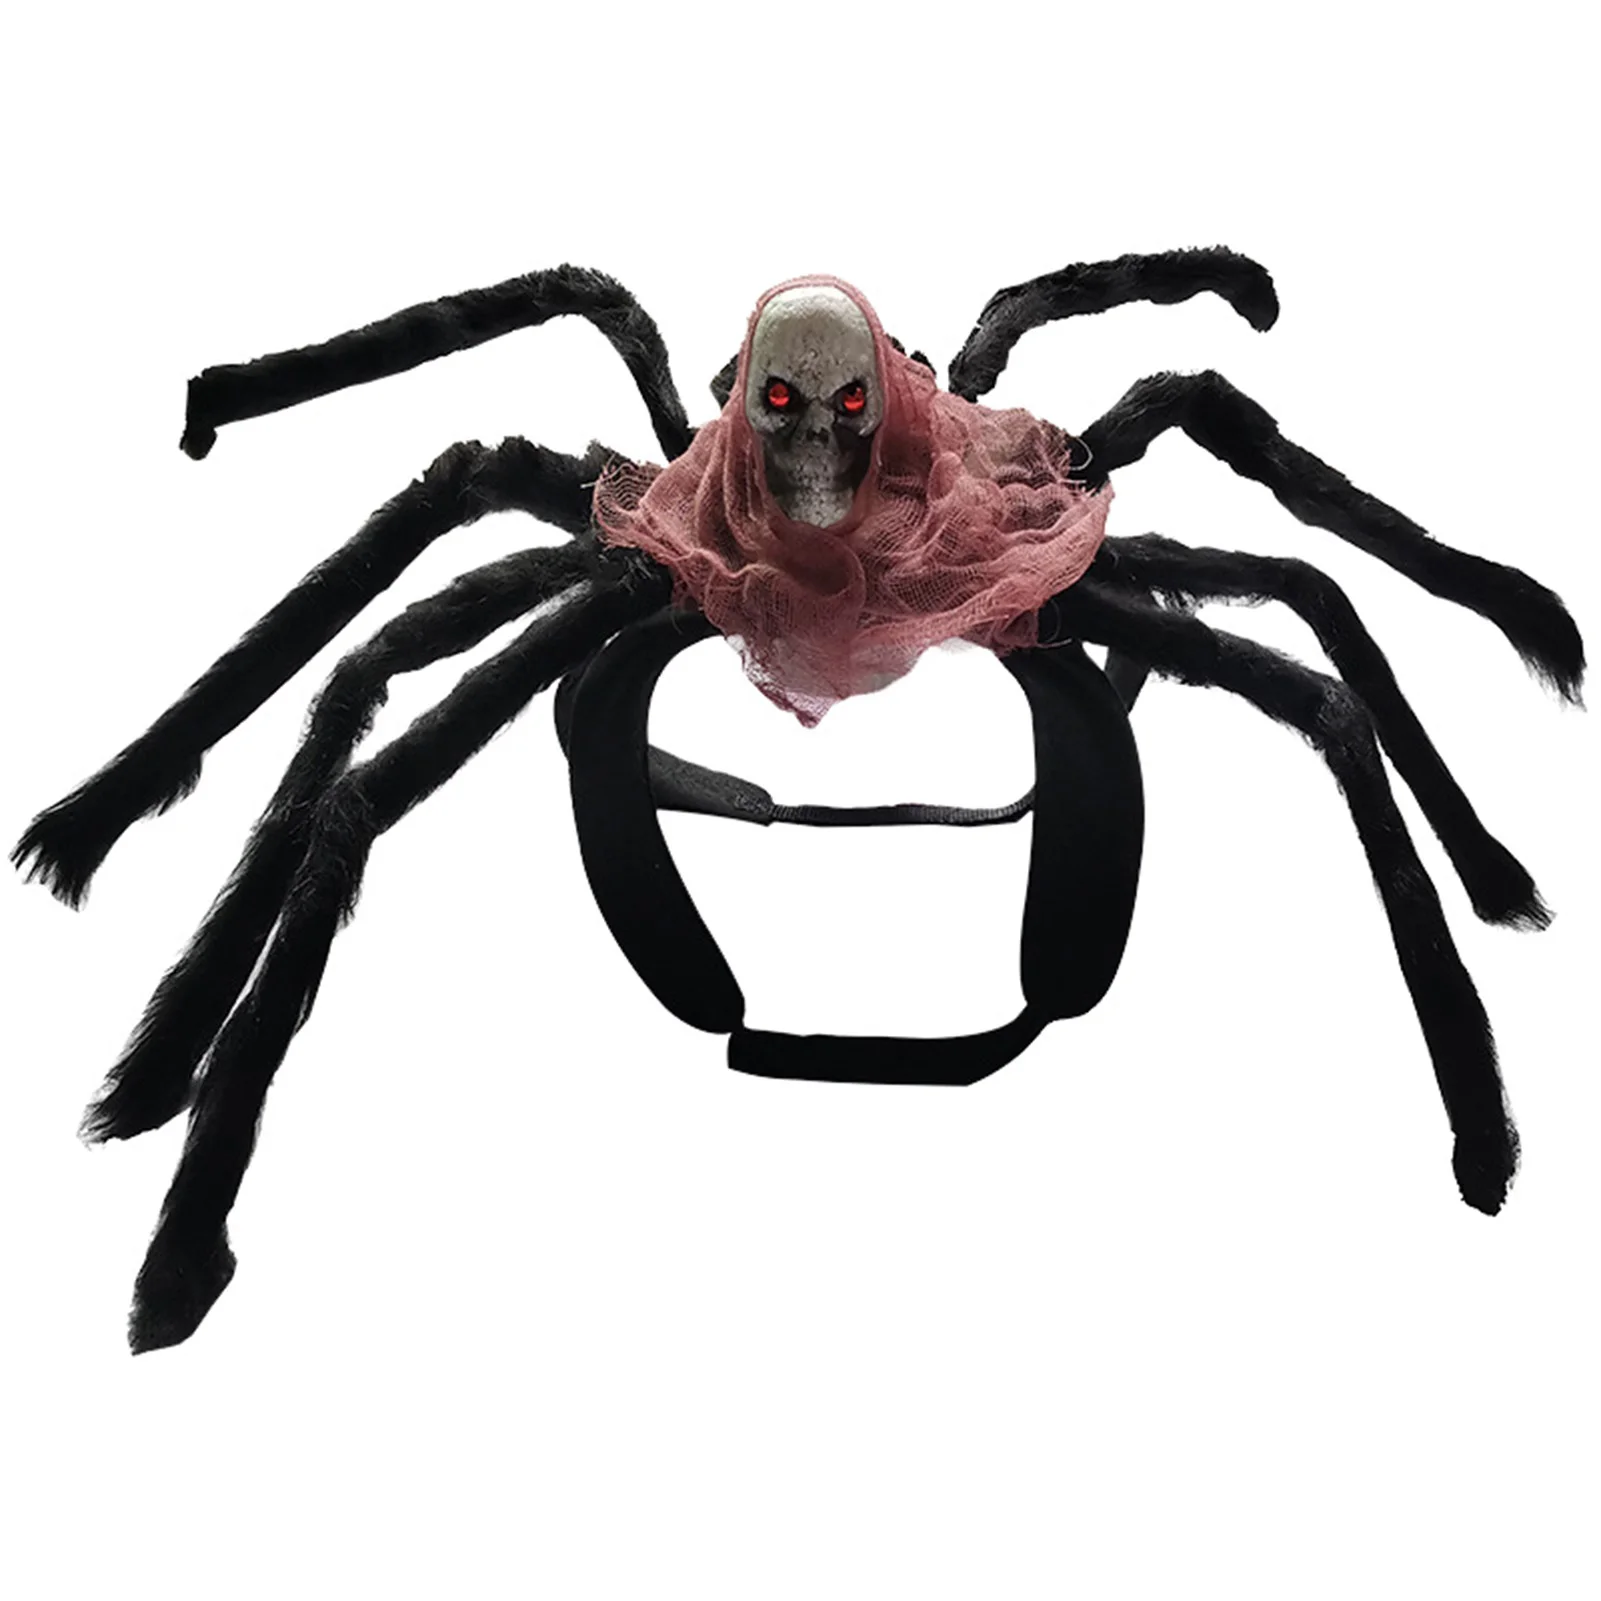 Halloween Spider Skull Modeling Role Play Used For Small And Medium-sized Dogs Kittens Parties Holiday Costumes Awesome